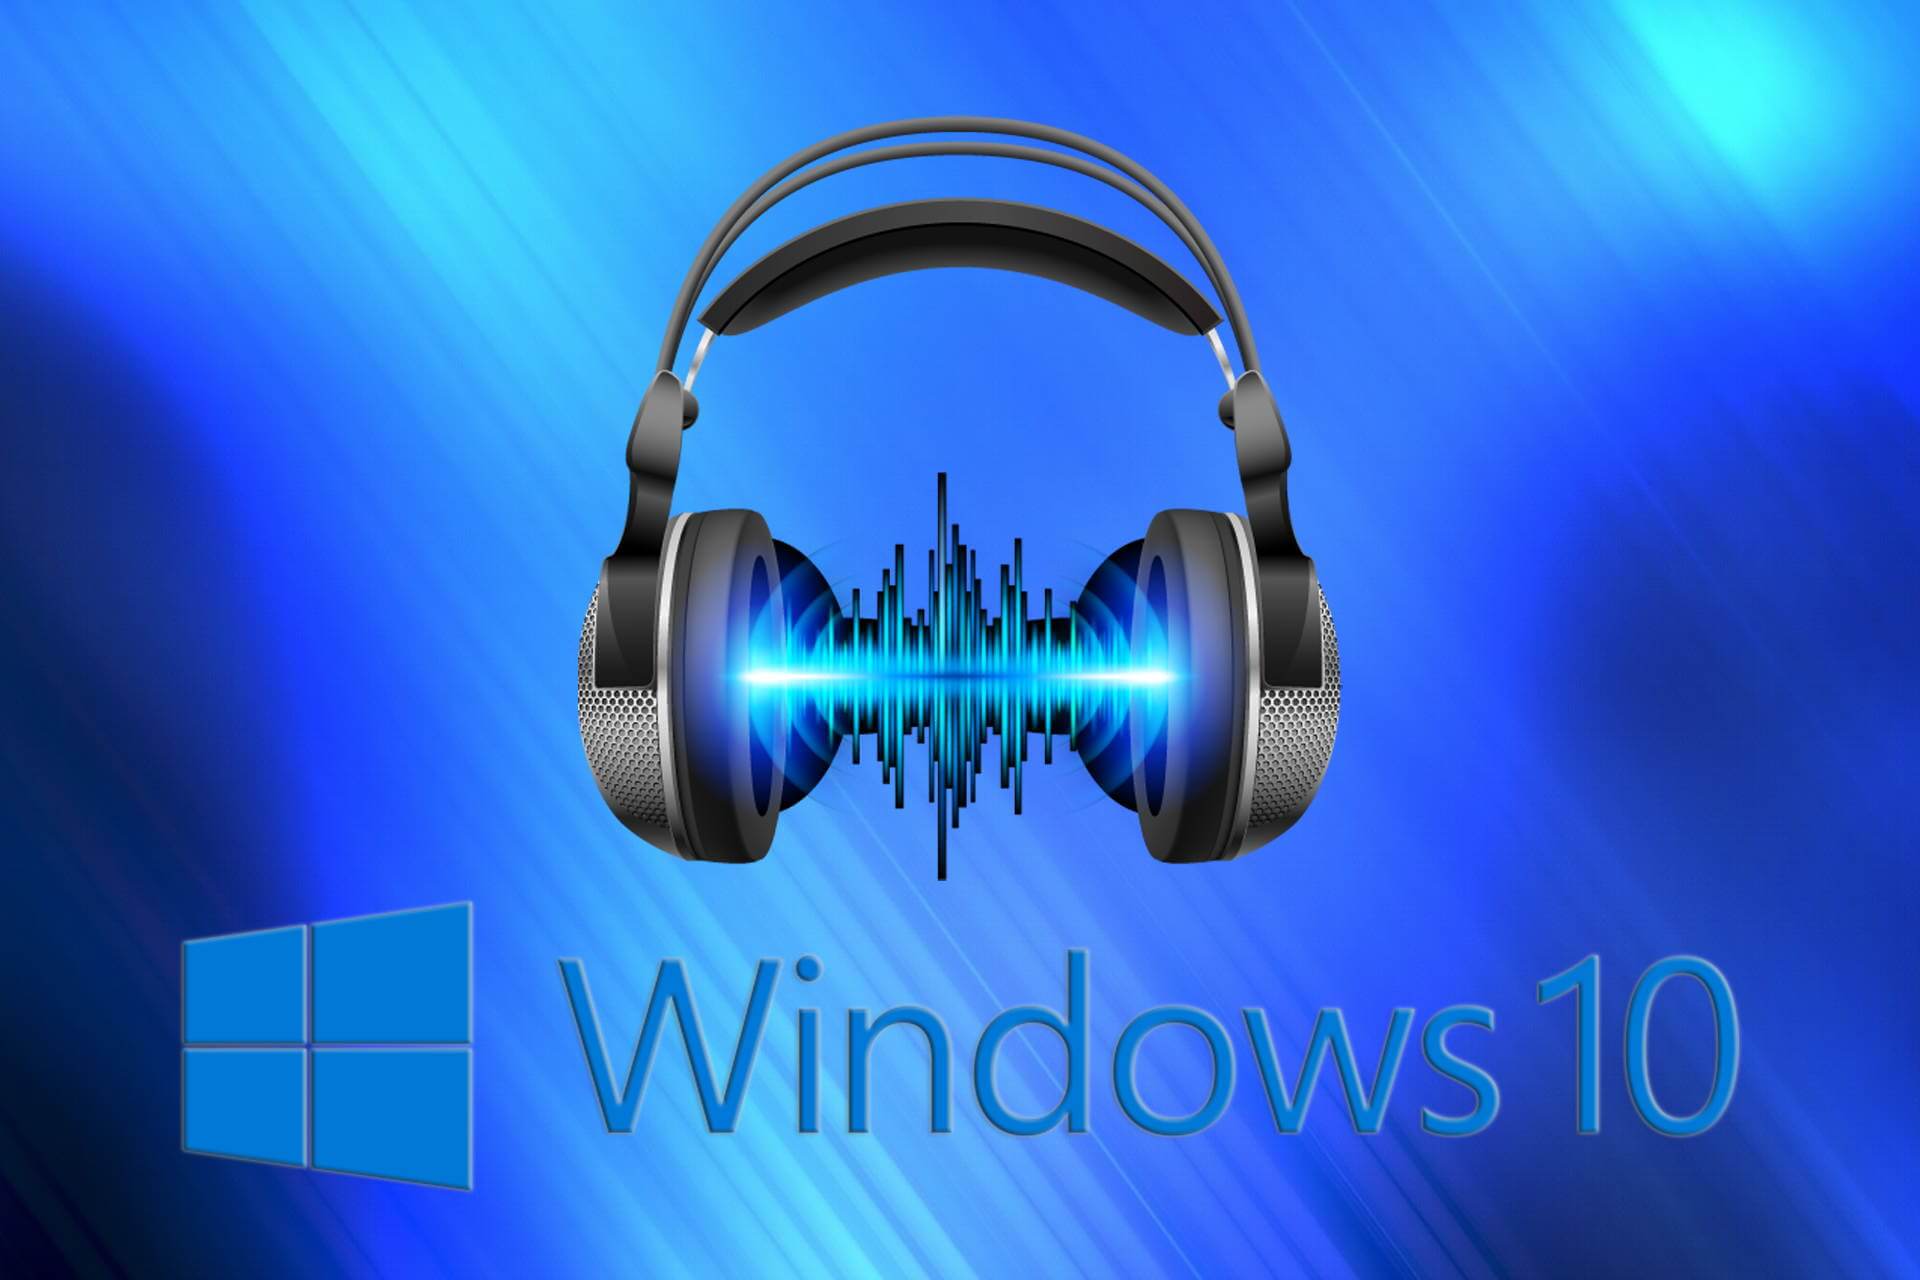 Play sound on two devices at once in Windows 10